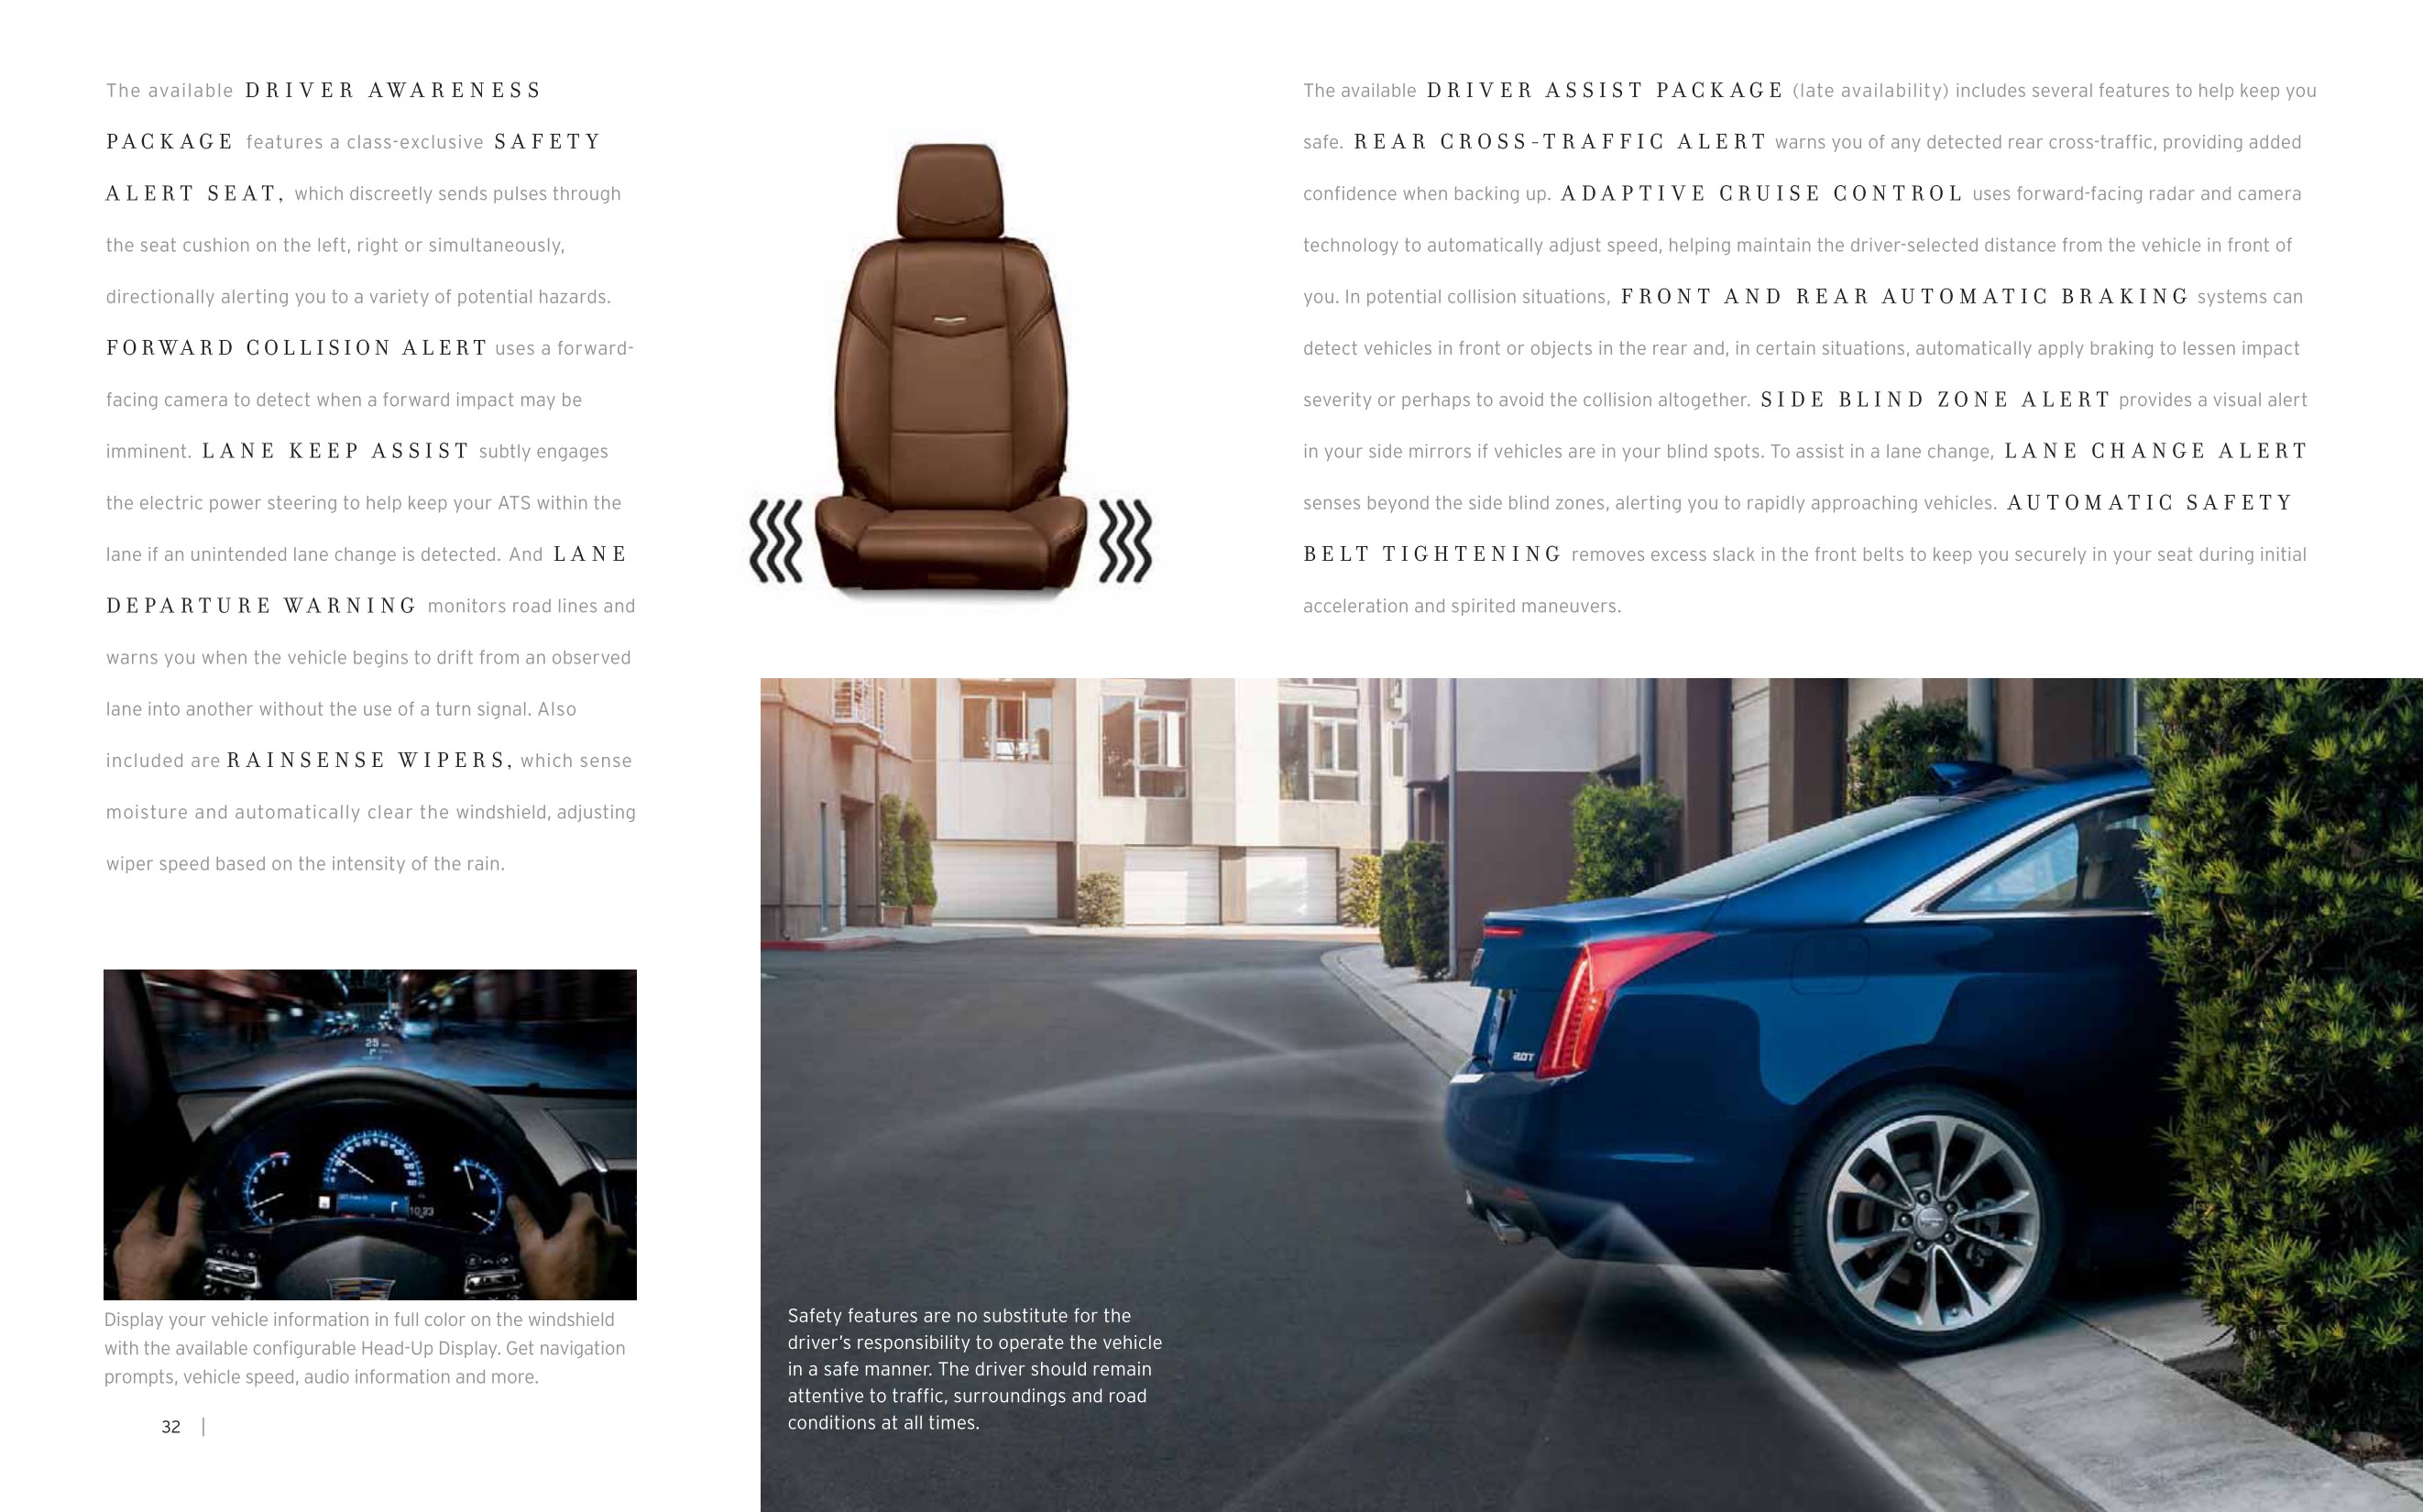 2015 Cadillac ATS Coupe Brochure Page 31